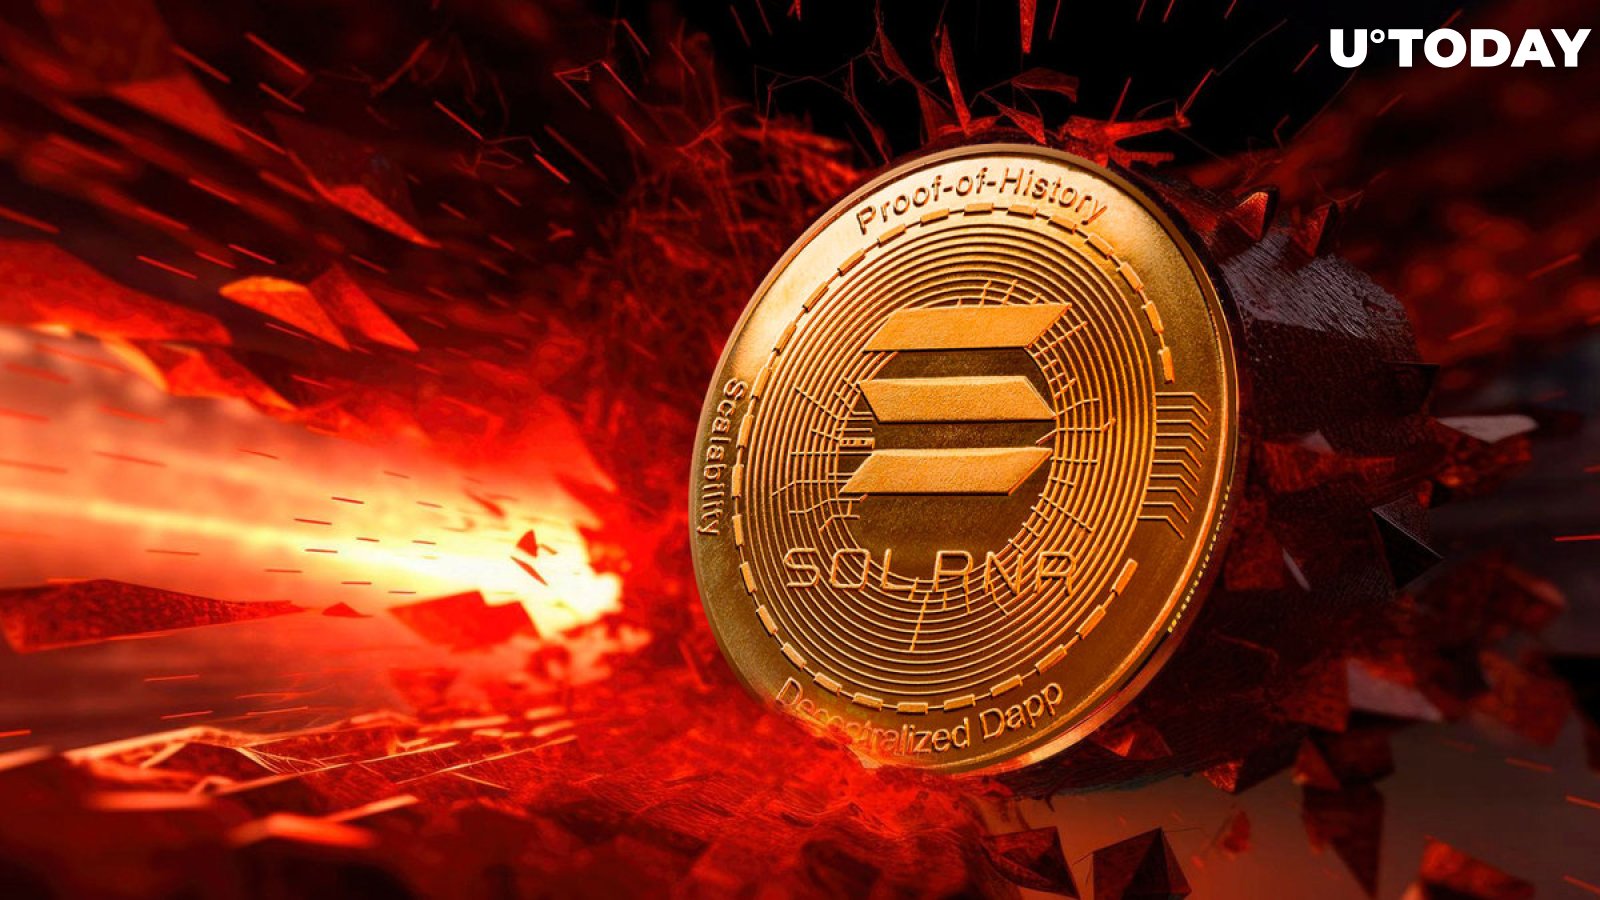 What's going on with Solana (SOL)?  Blockchain shows bizarre statistics